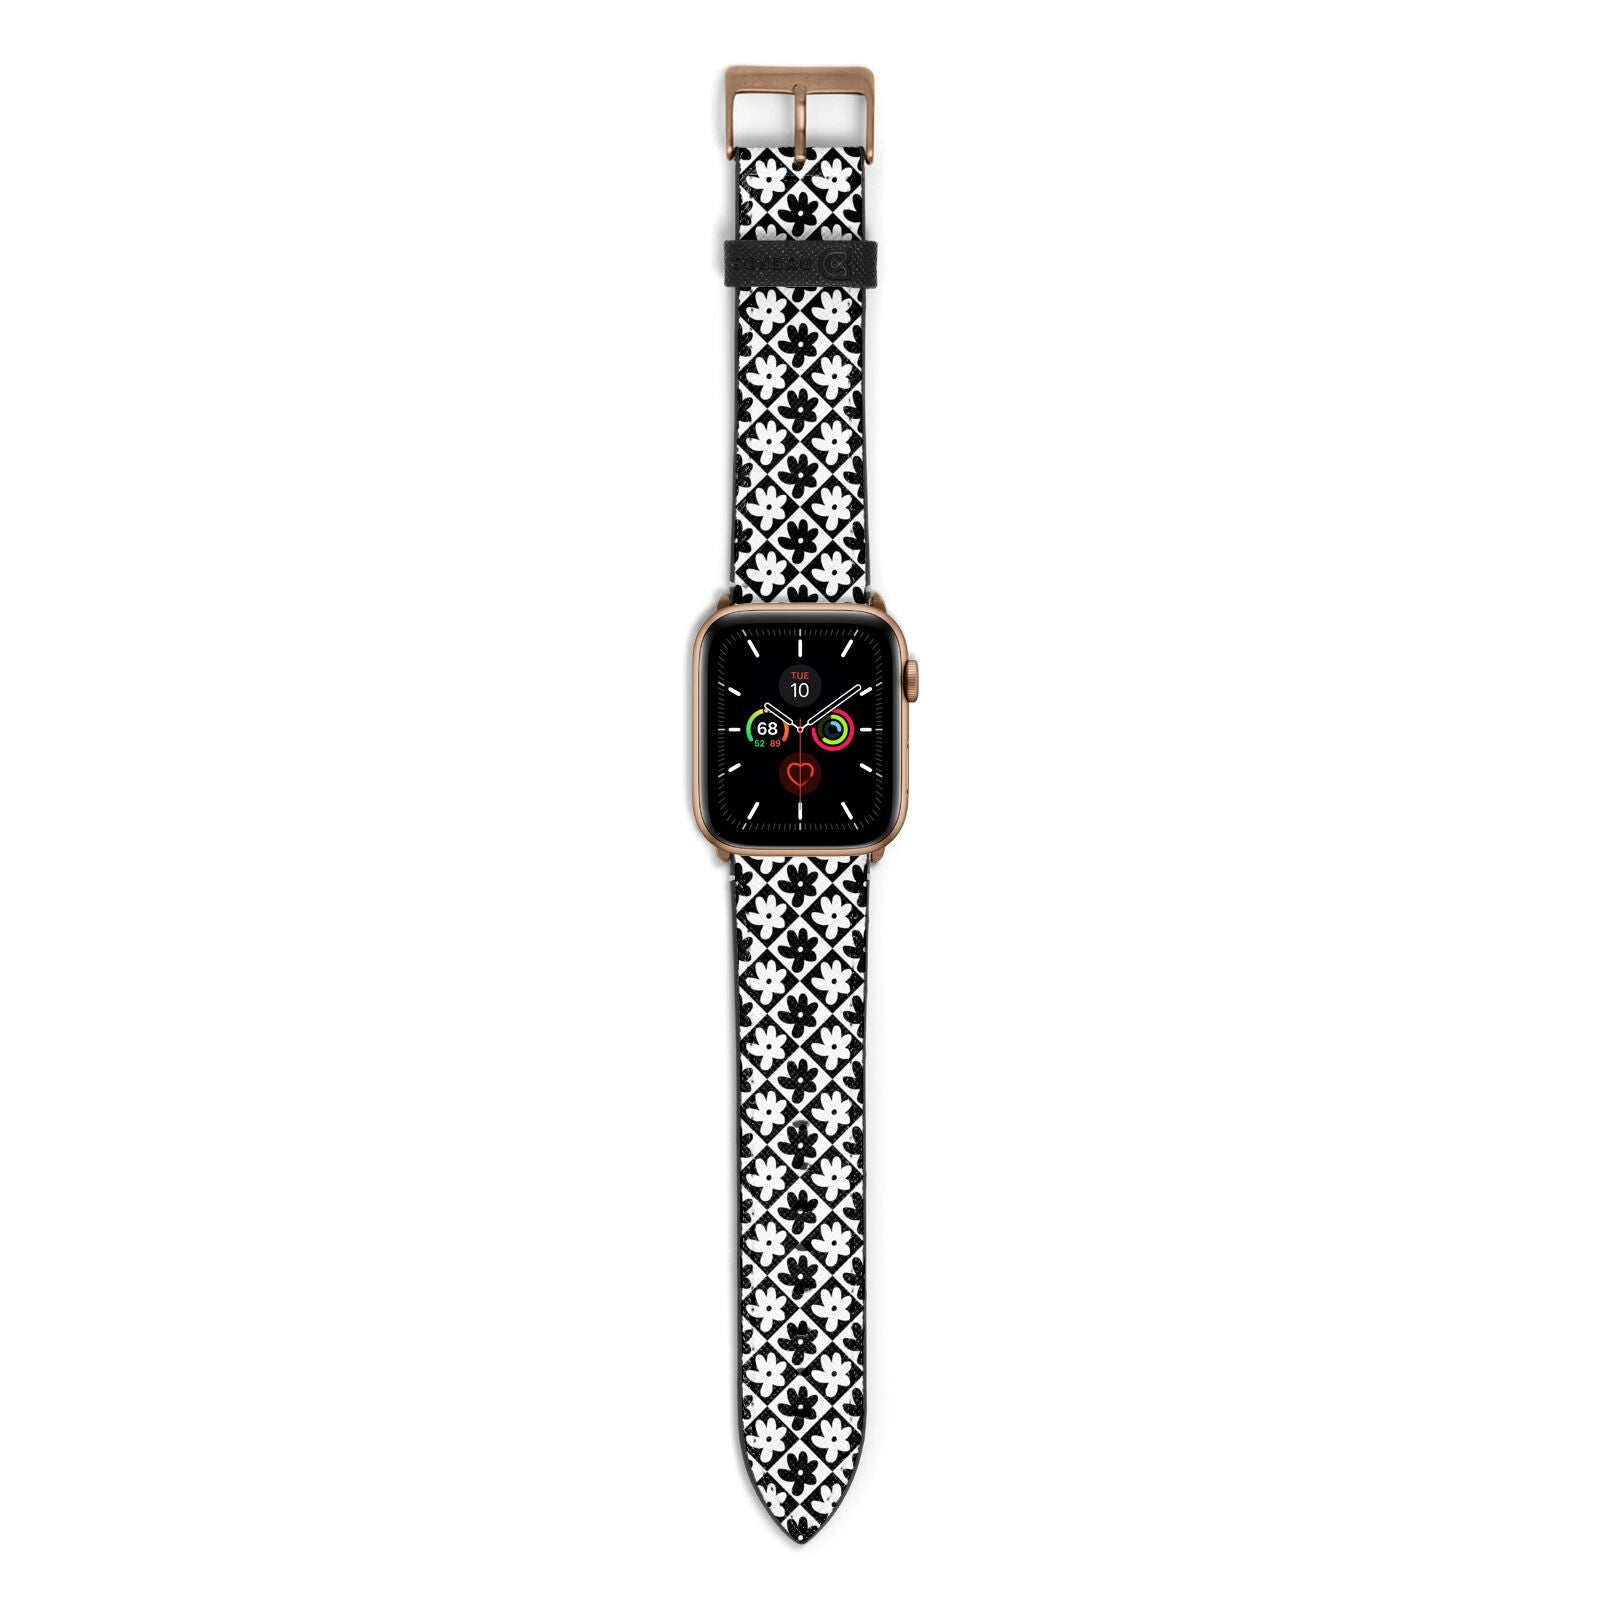 Check Flower Apple Watch Strap with Gold Hardware